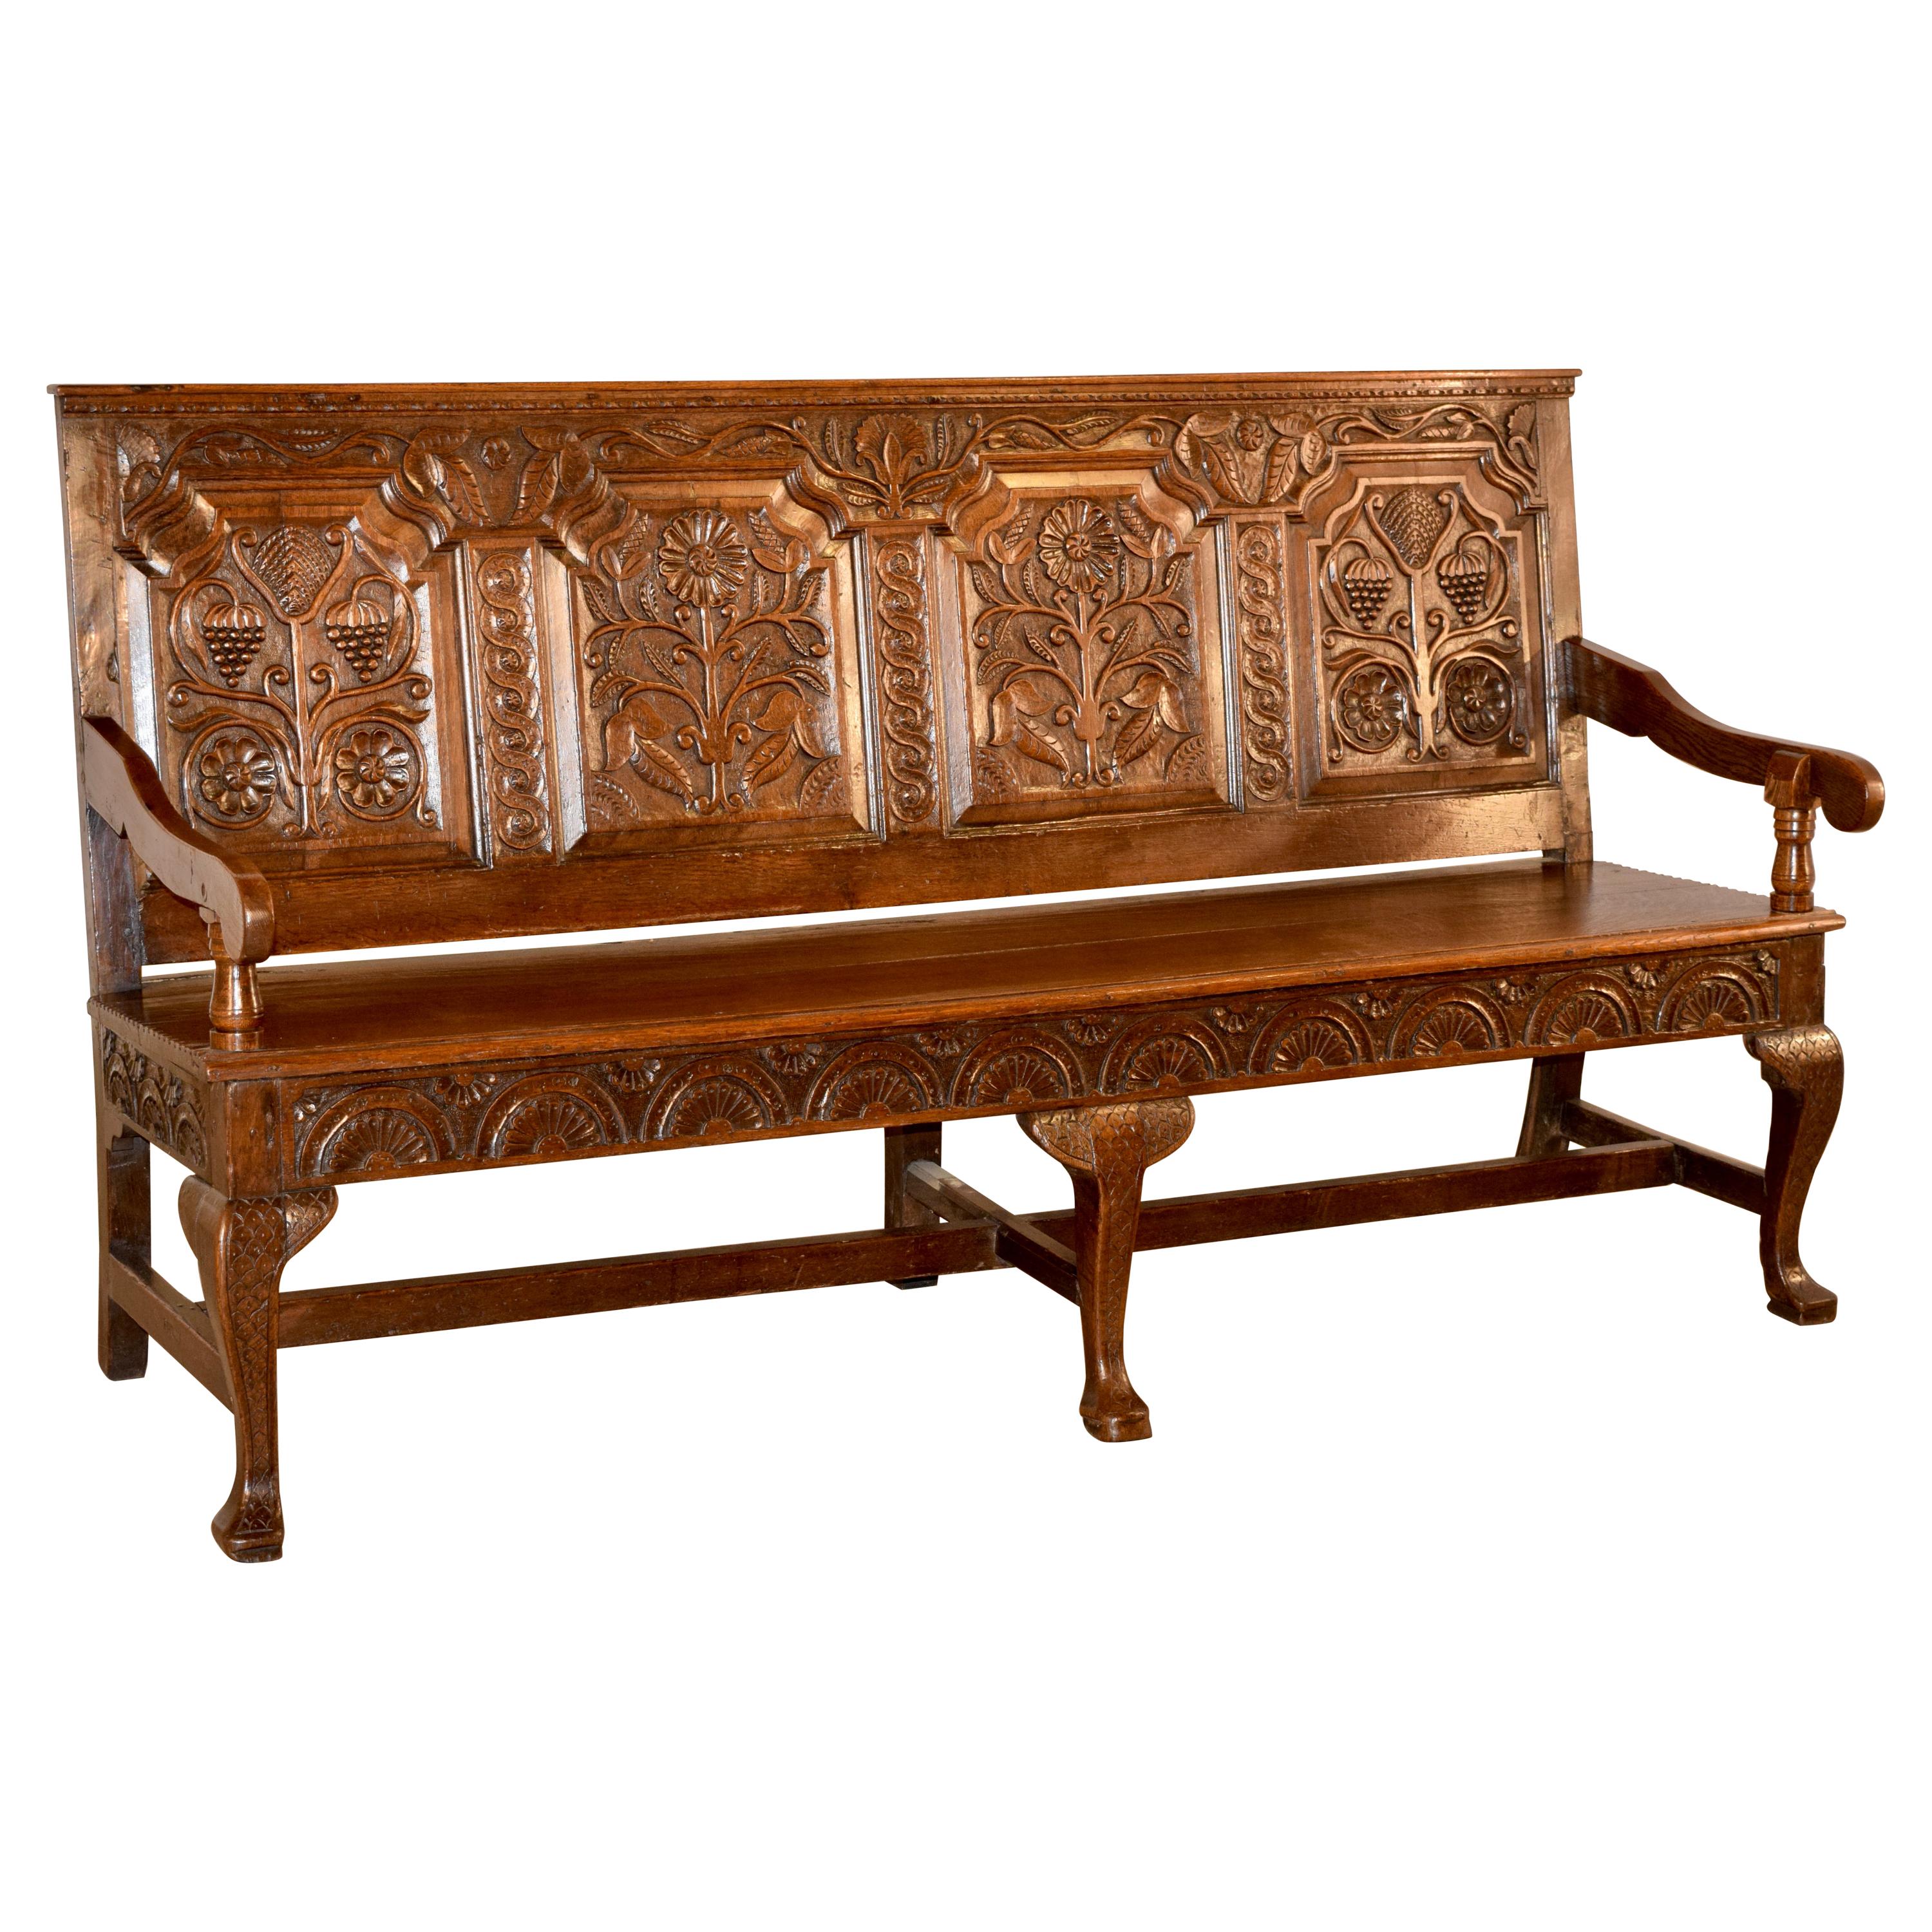 Early 18th Century Paneled Bench For Sale